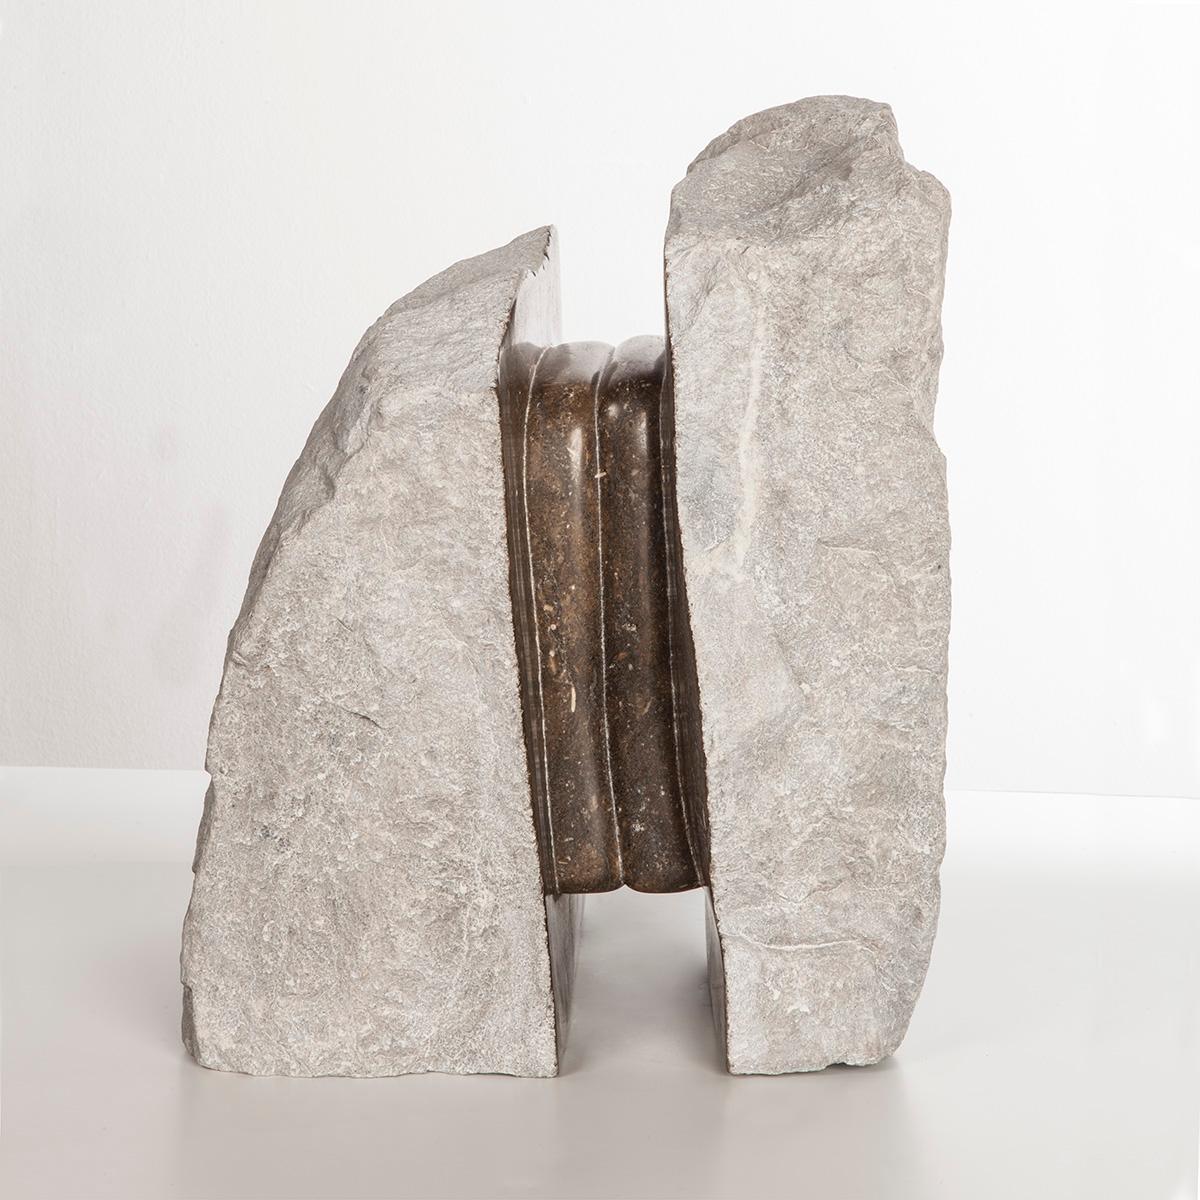 Ricard Casabayó is a Spanish sculptor with a extensive artistic career, whose work
reveals the emotions and sensations hidden in natural materials such as marble and
stone. The visible and the invisible of nature are manifested in his